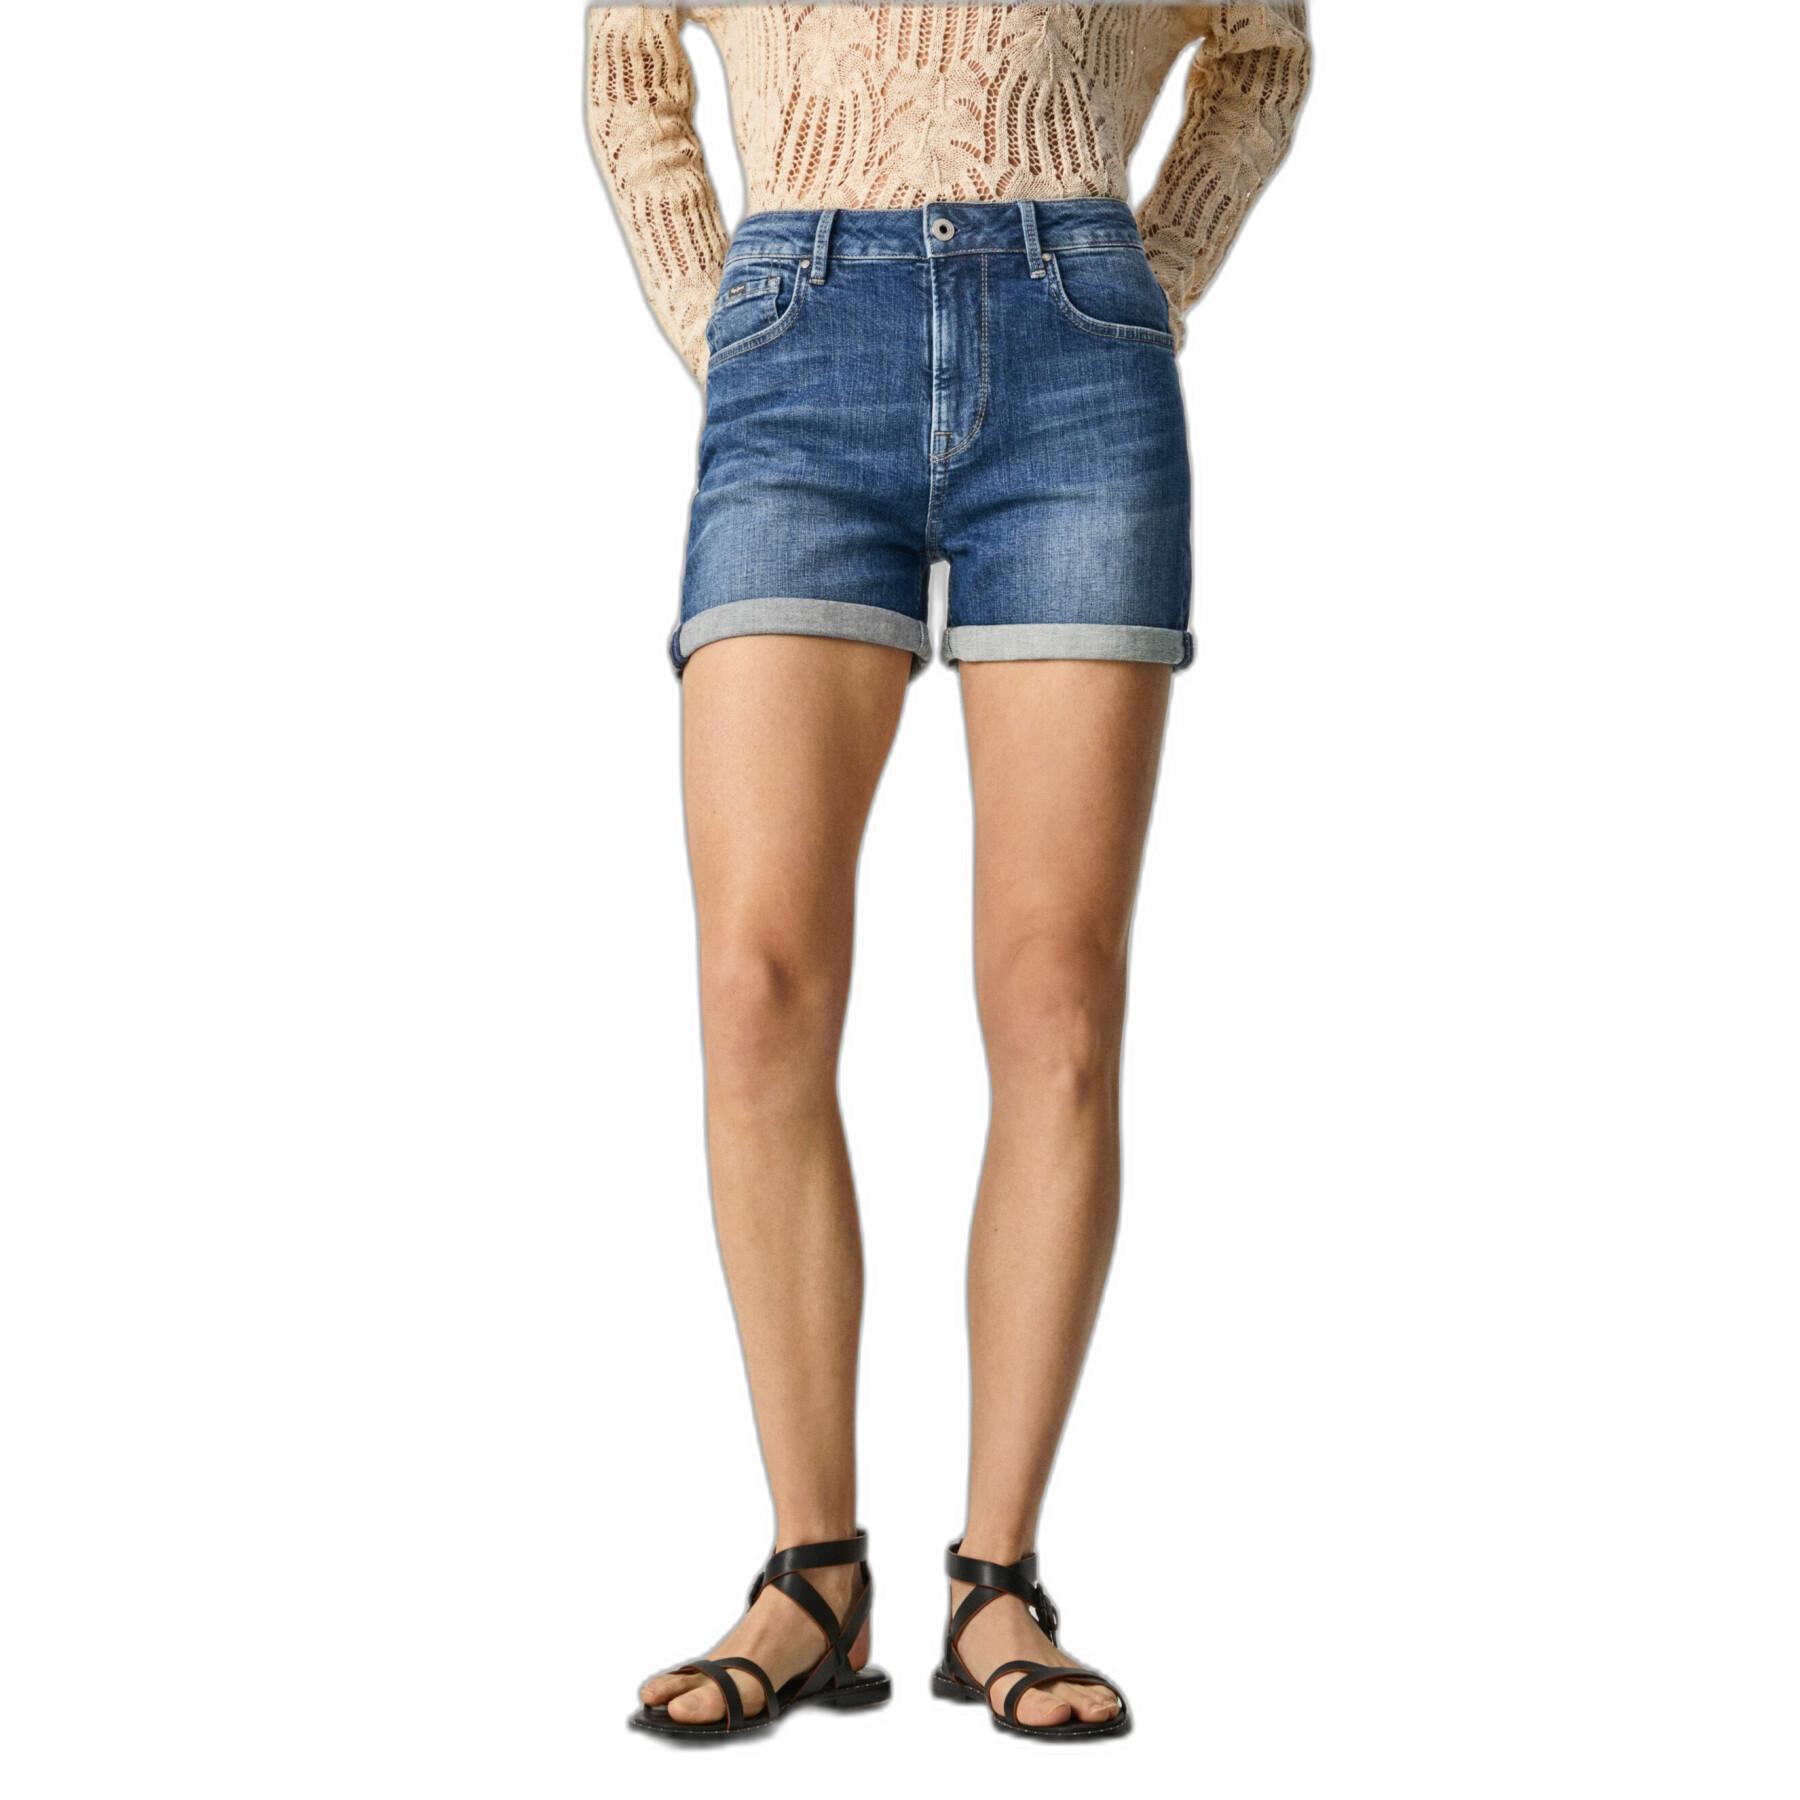 Short femme Pepe Jeans Mary